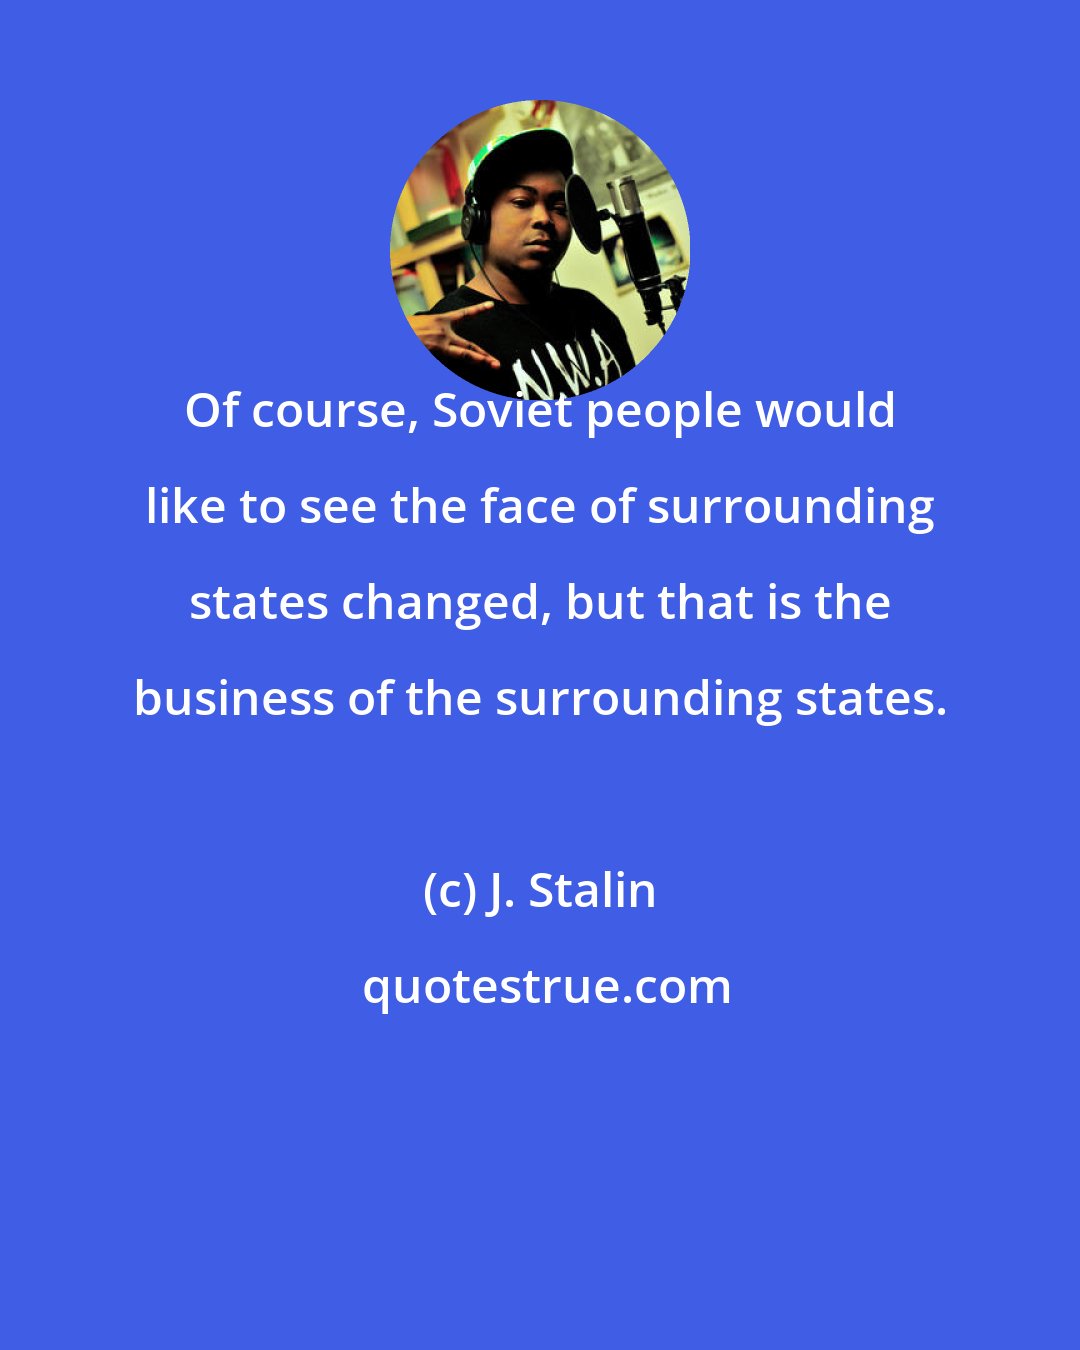 J. Stalin: Of course, Soviet people would like to see the face of surrounding states changed, but that is the business of the surrounding states.